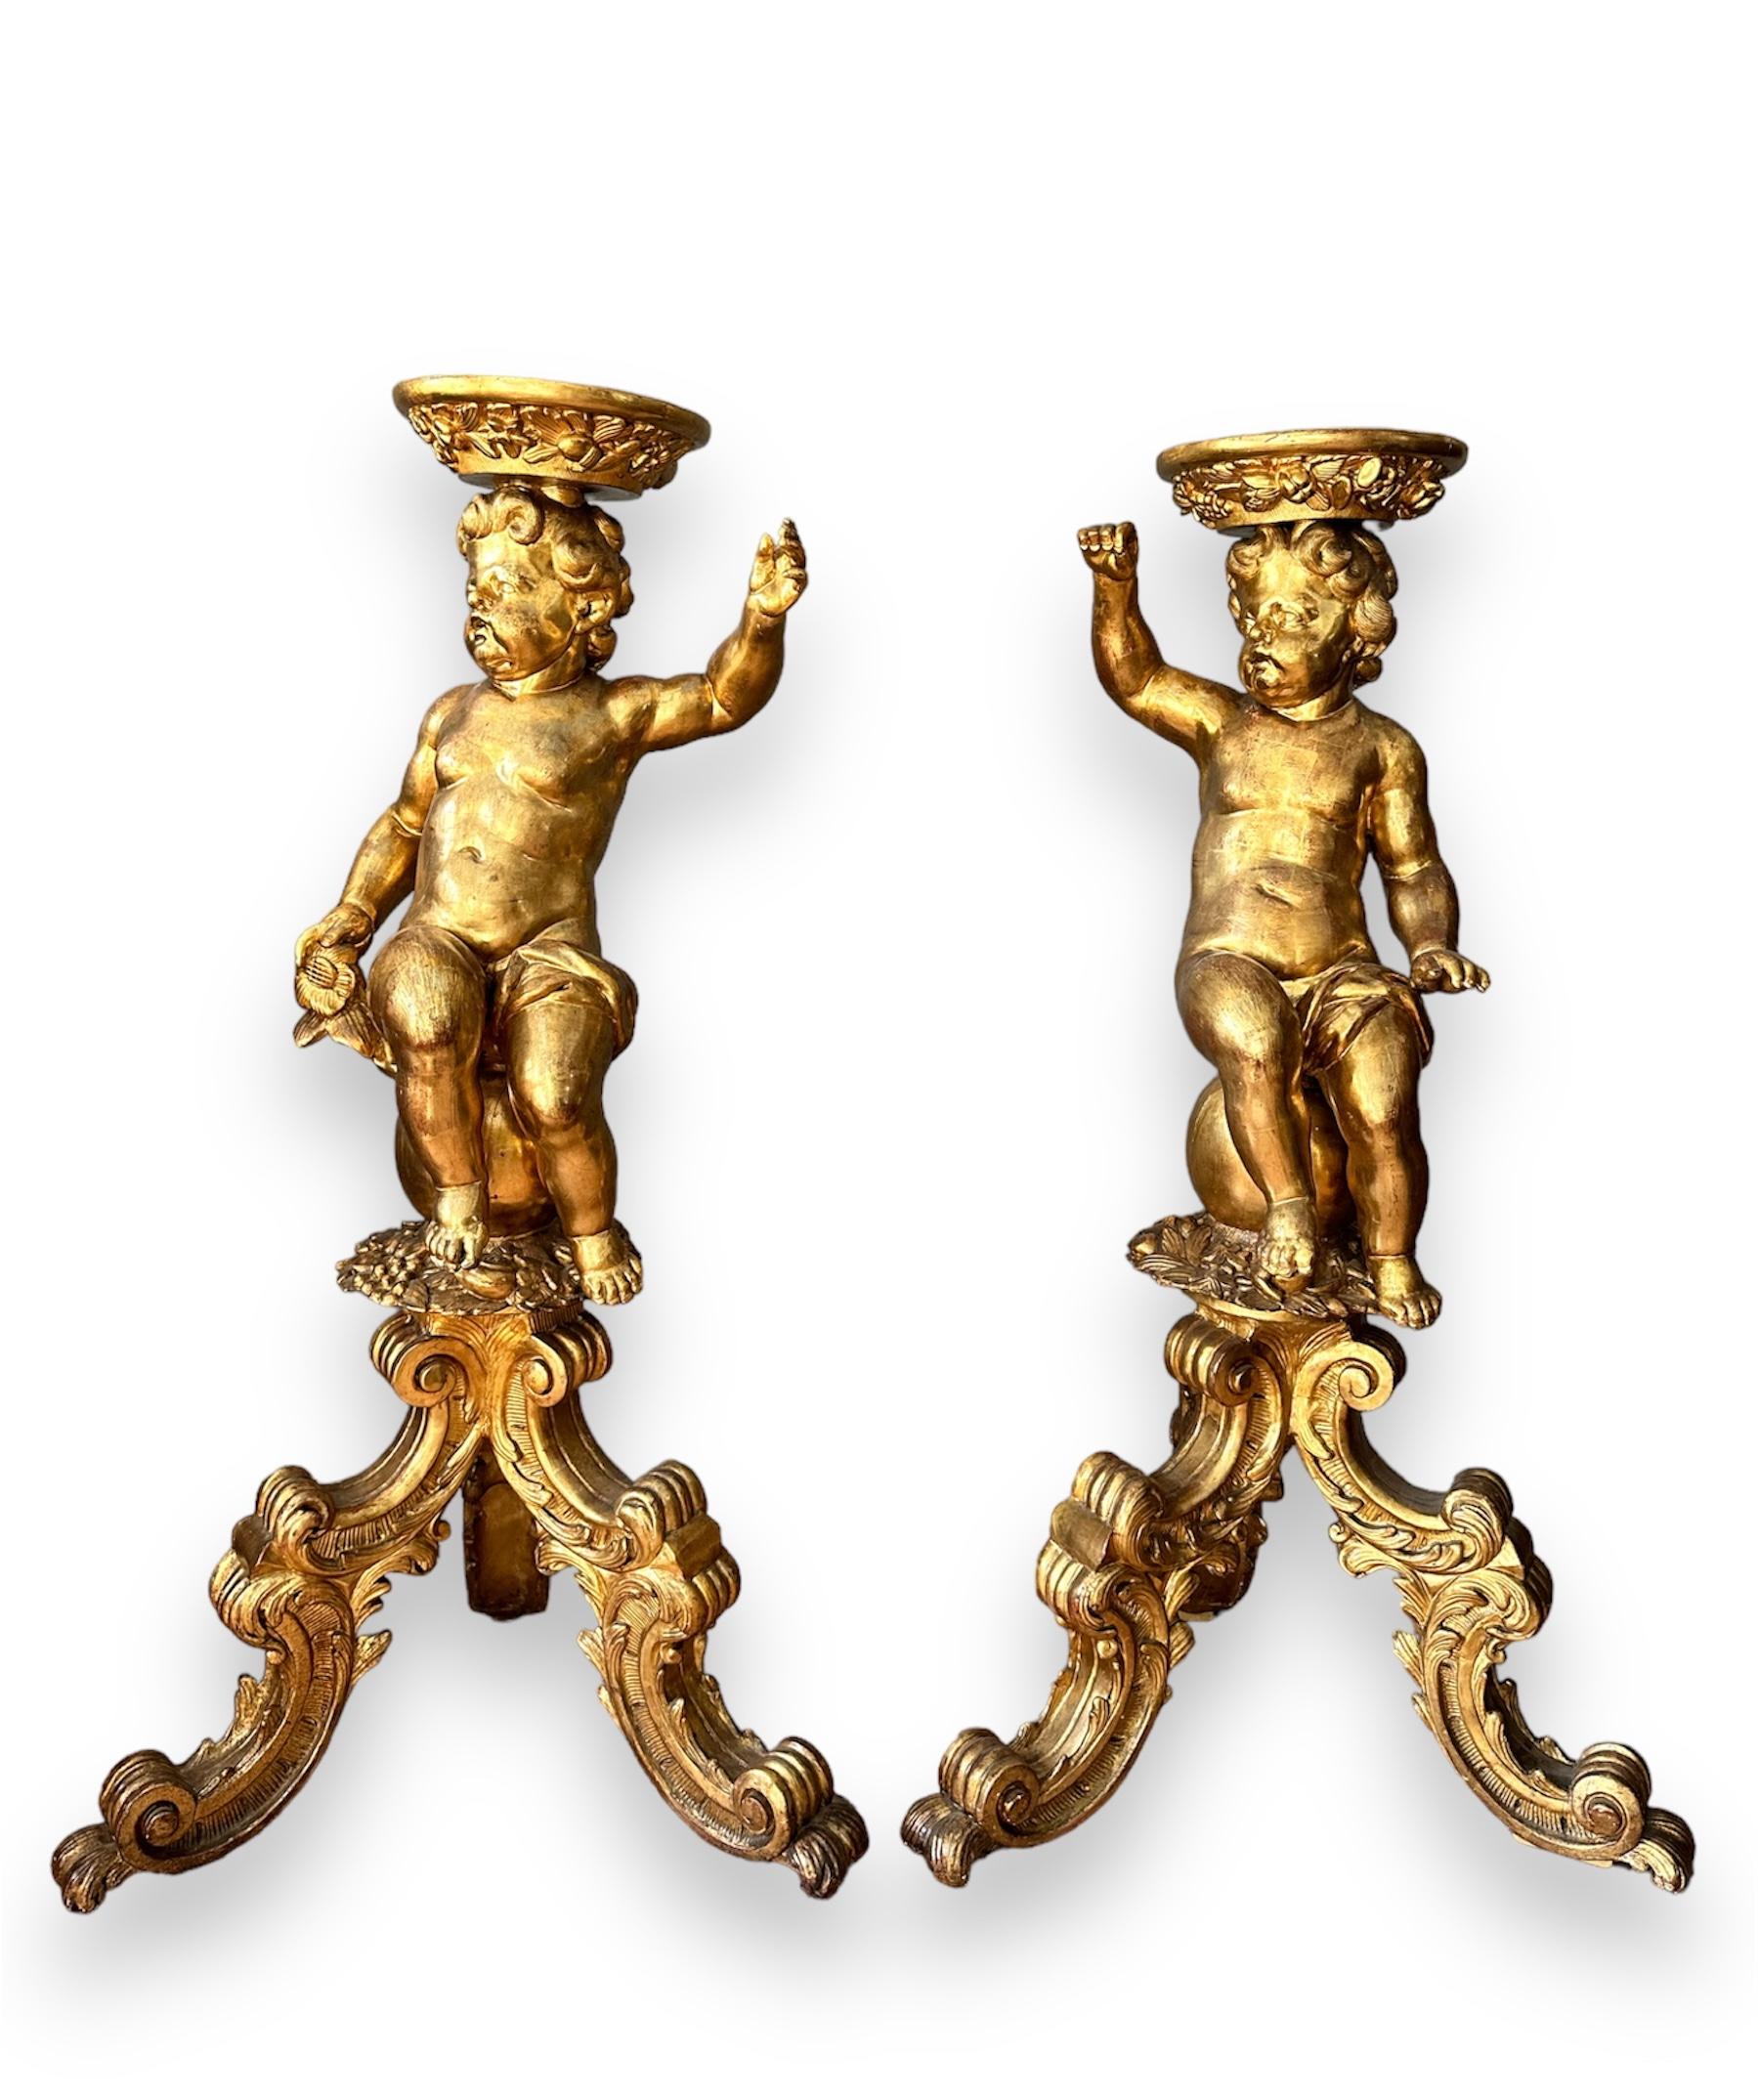 Elegant and rare pair of wooden sculptures depicting Putti, left and right.

Carved in an excellent way in every detail and gilded entirely with pure gold leaf.

Works of high Italian cabinet-making from the first half of the 1700s.